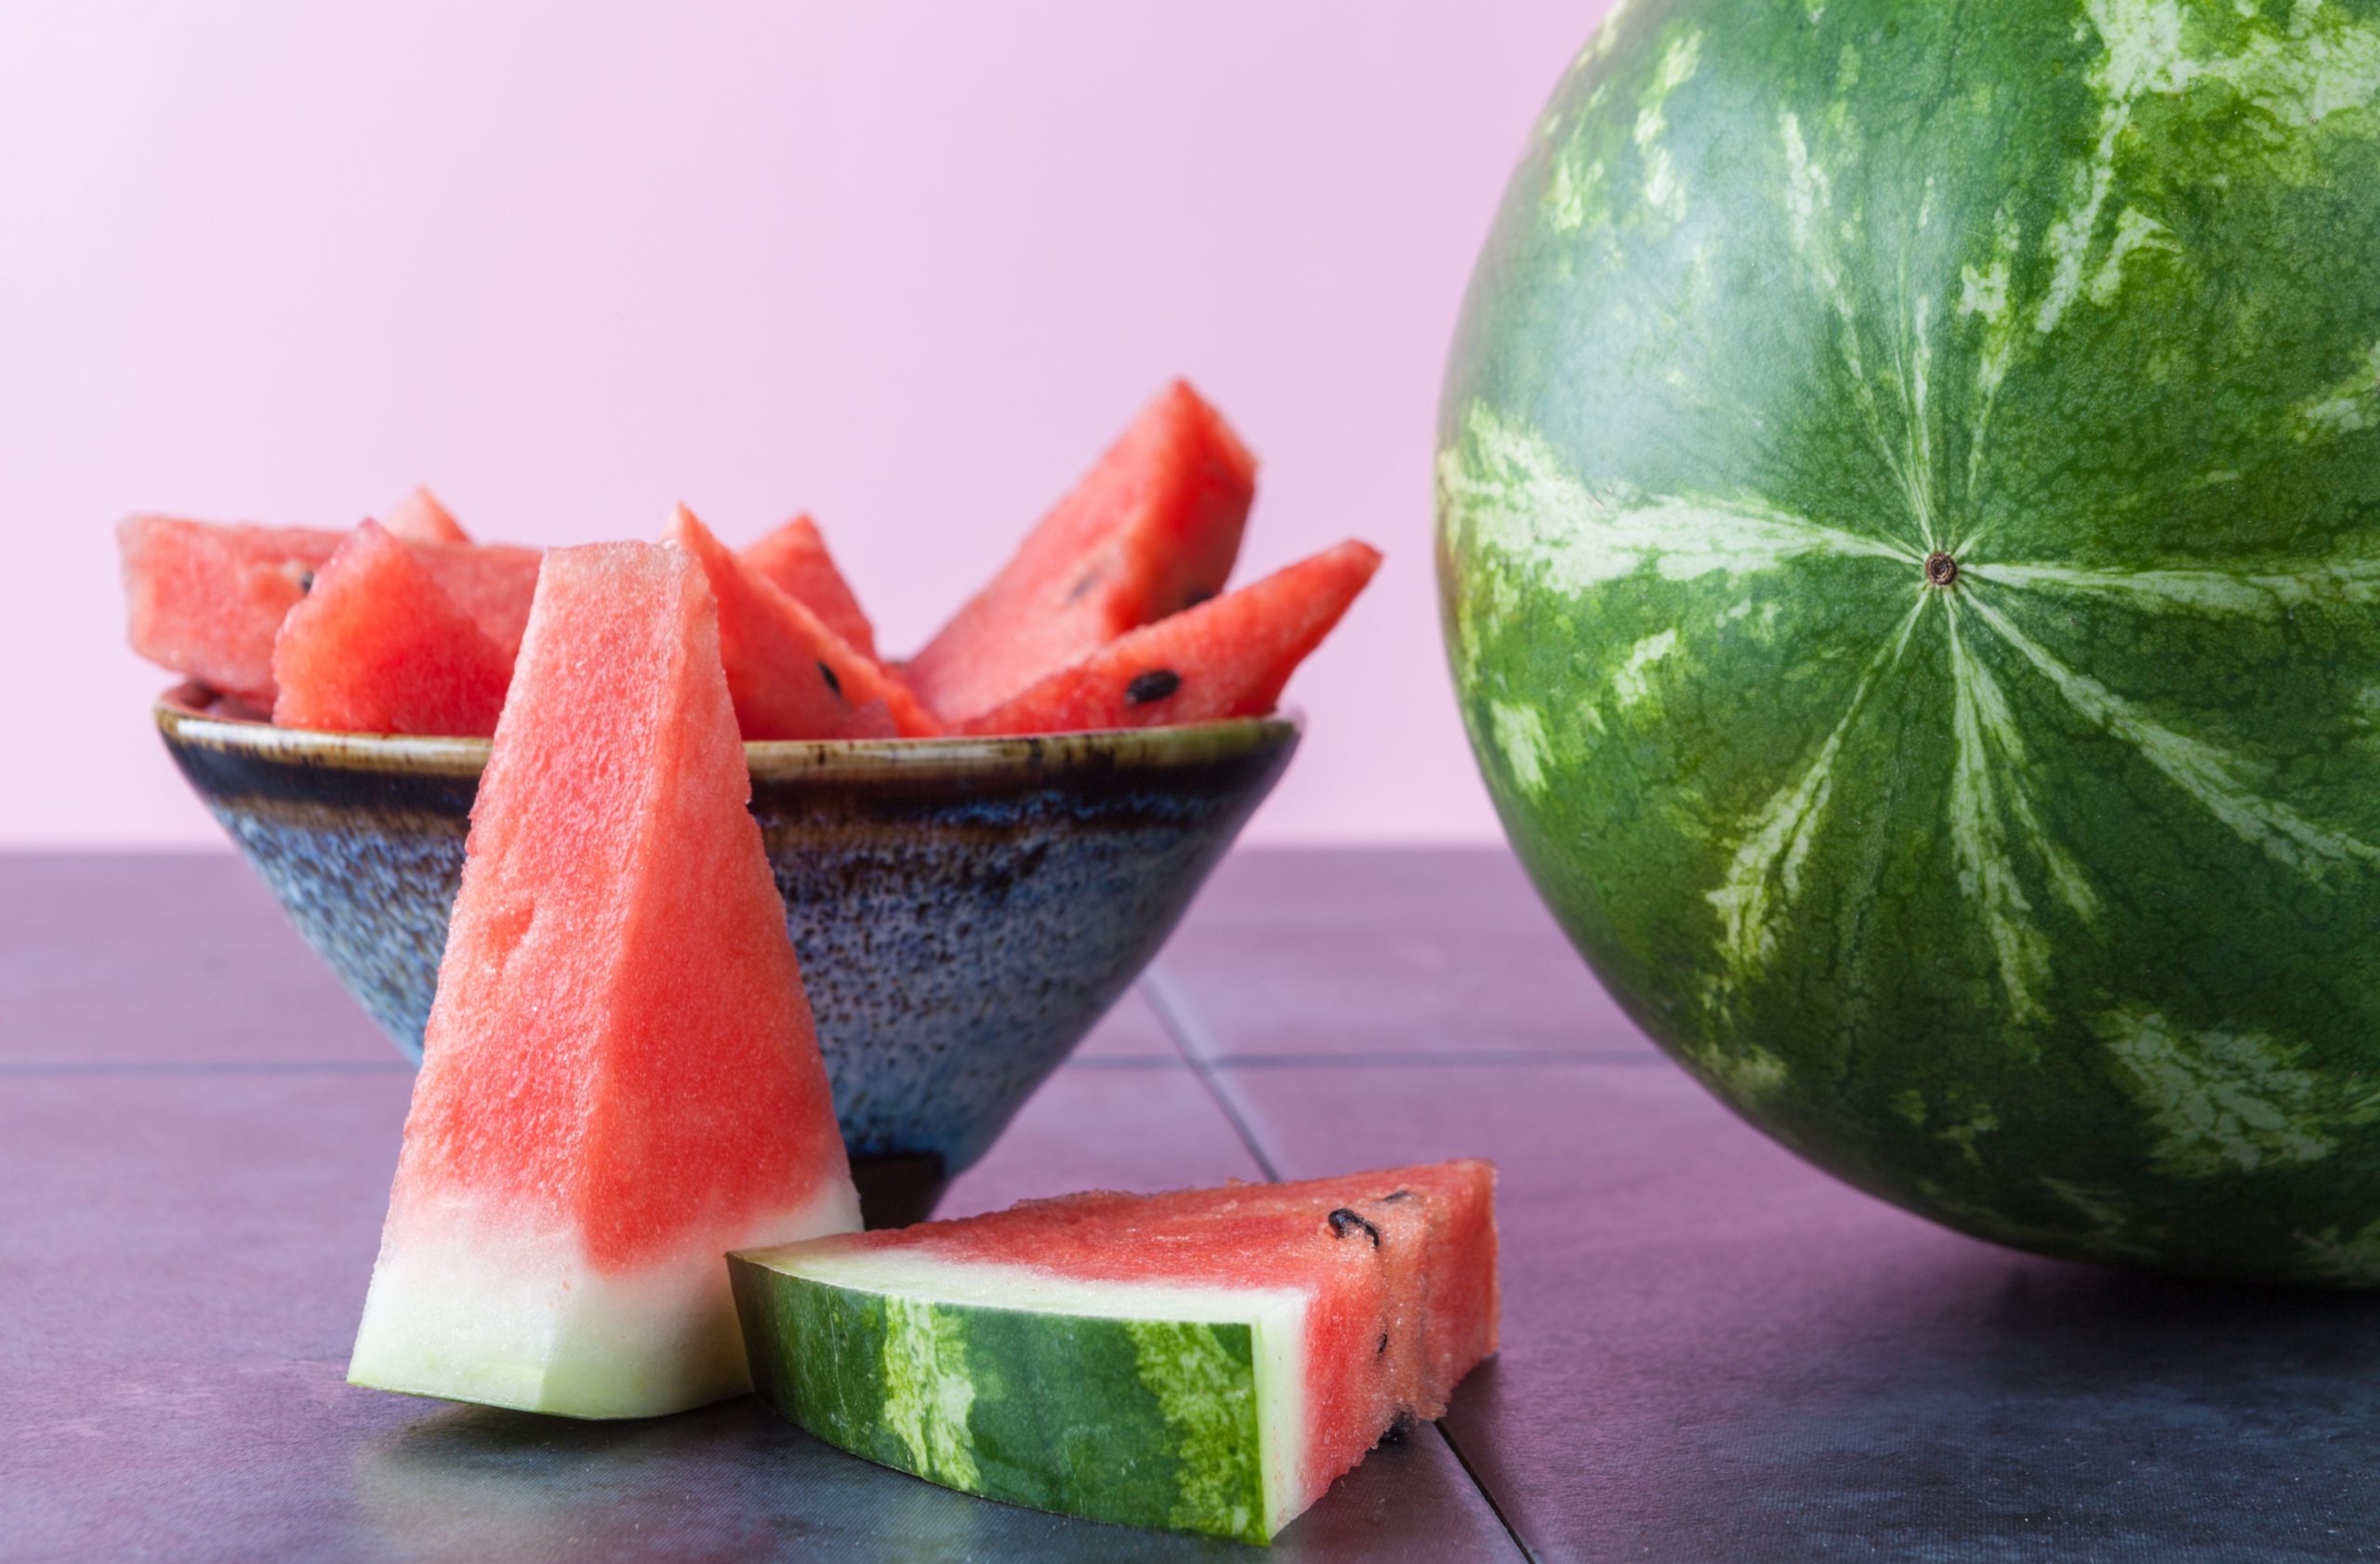 Benefits of Watermelon for a Healthy Life